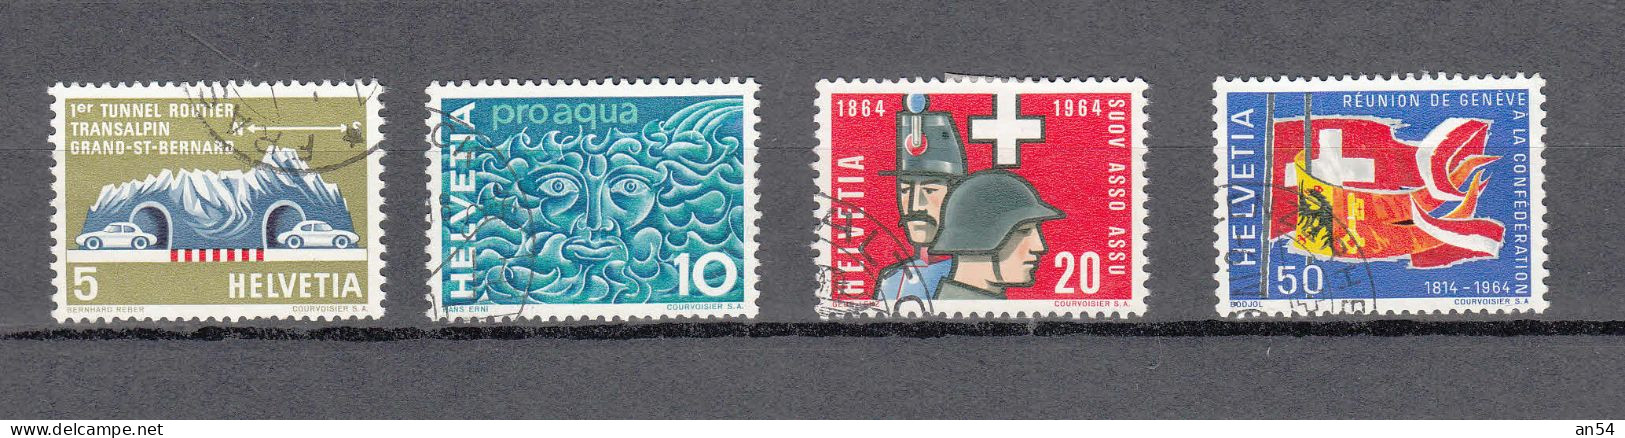 1964  N° 406 à 409    OBLITERES       CATALOGUE SBK - Used Stamps